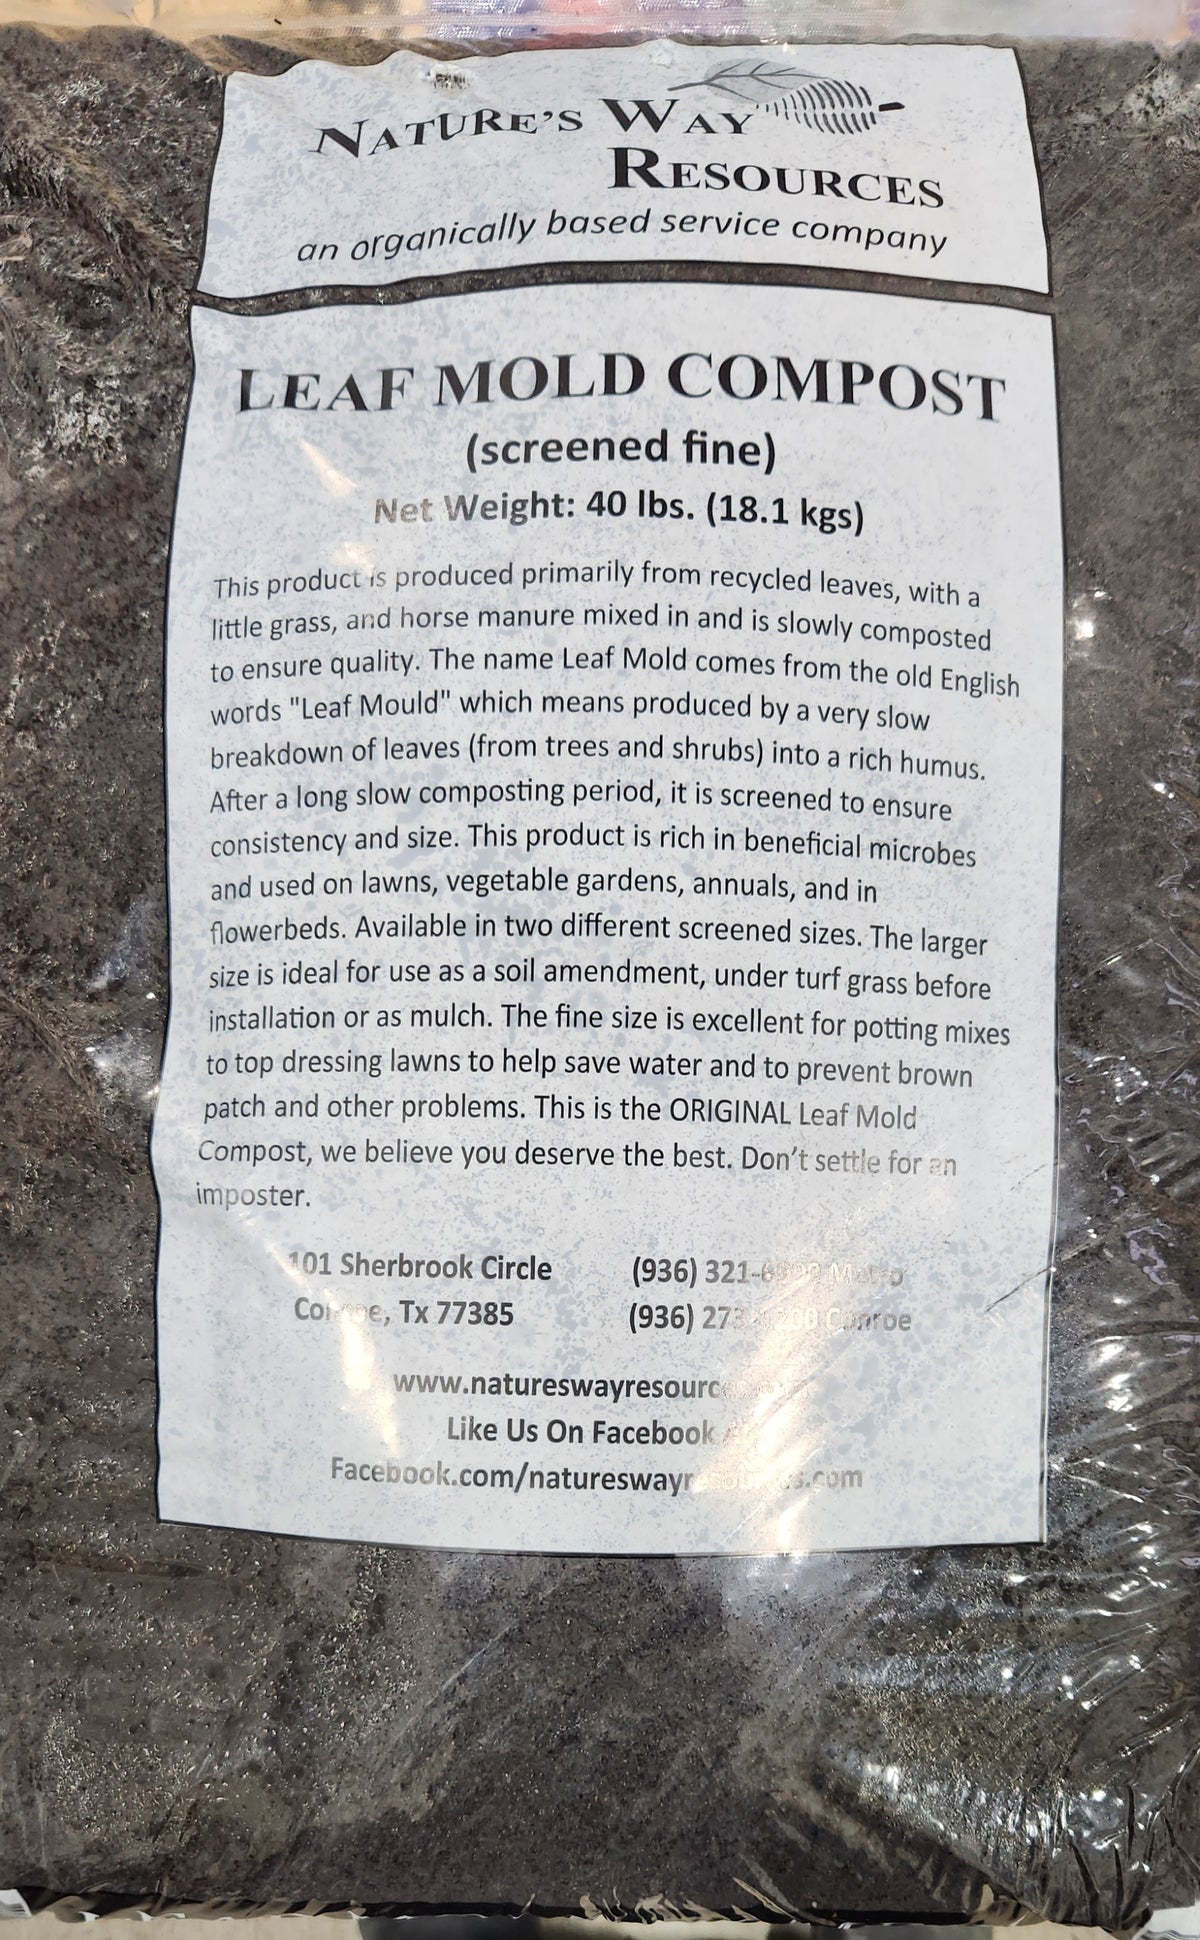 Natures way resources Leaf mold compost